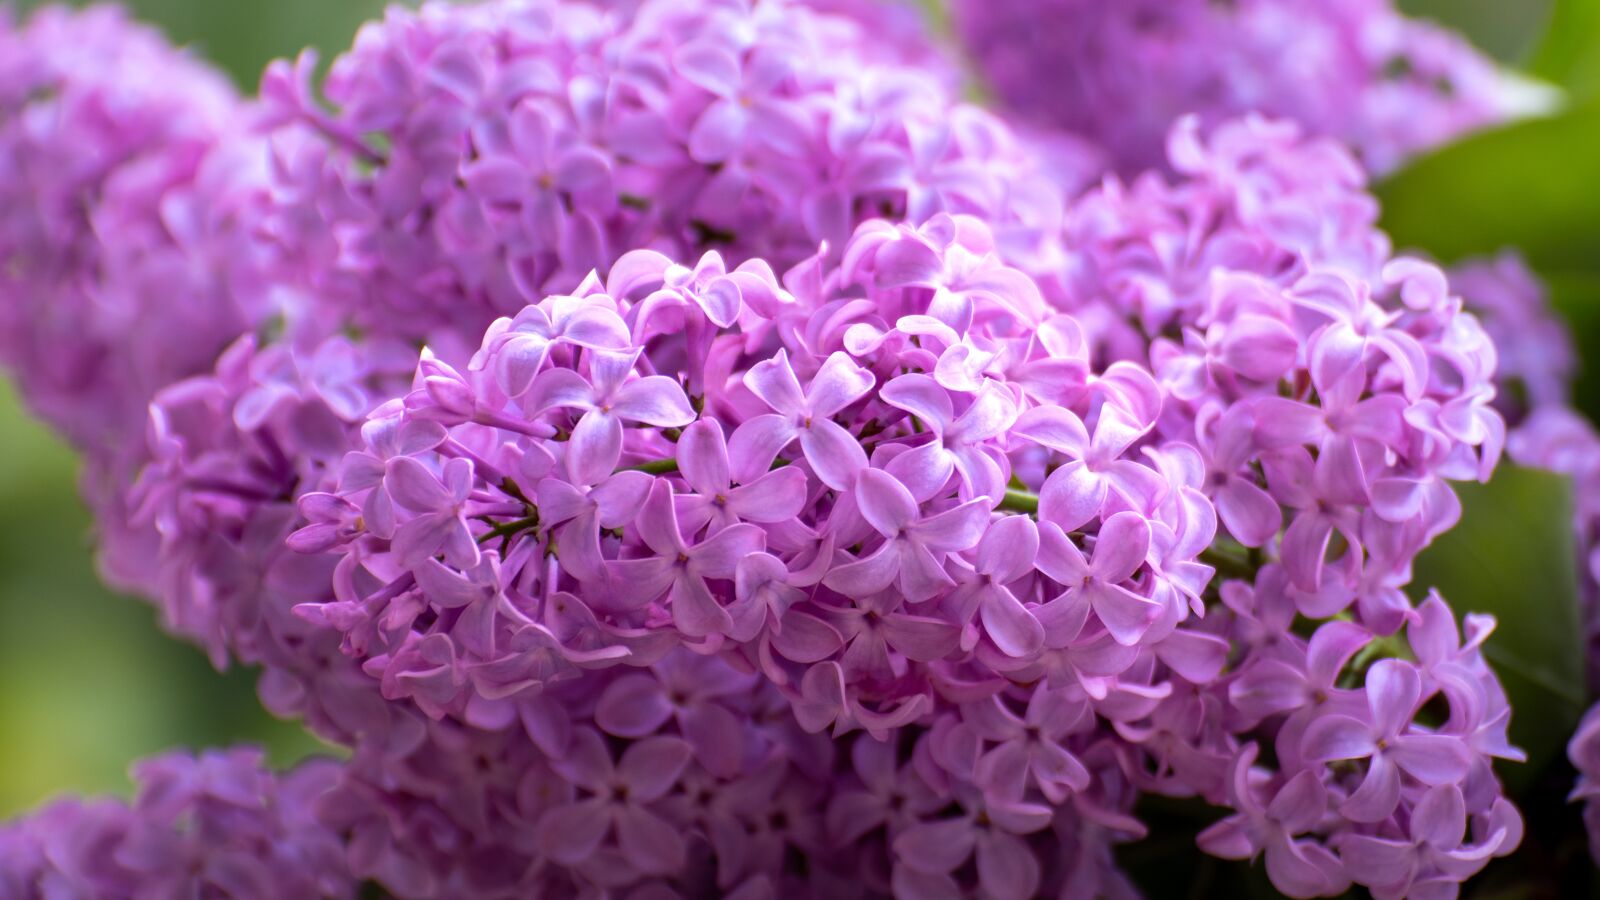 Sony a6500 sample photo. Lilacs, flowers, spring photography